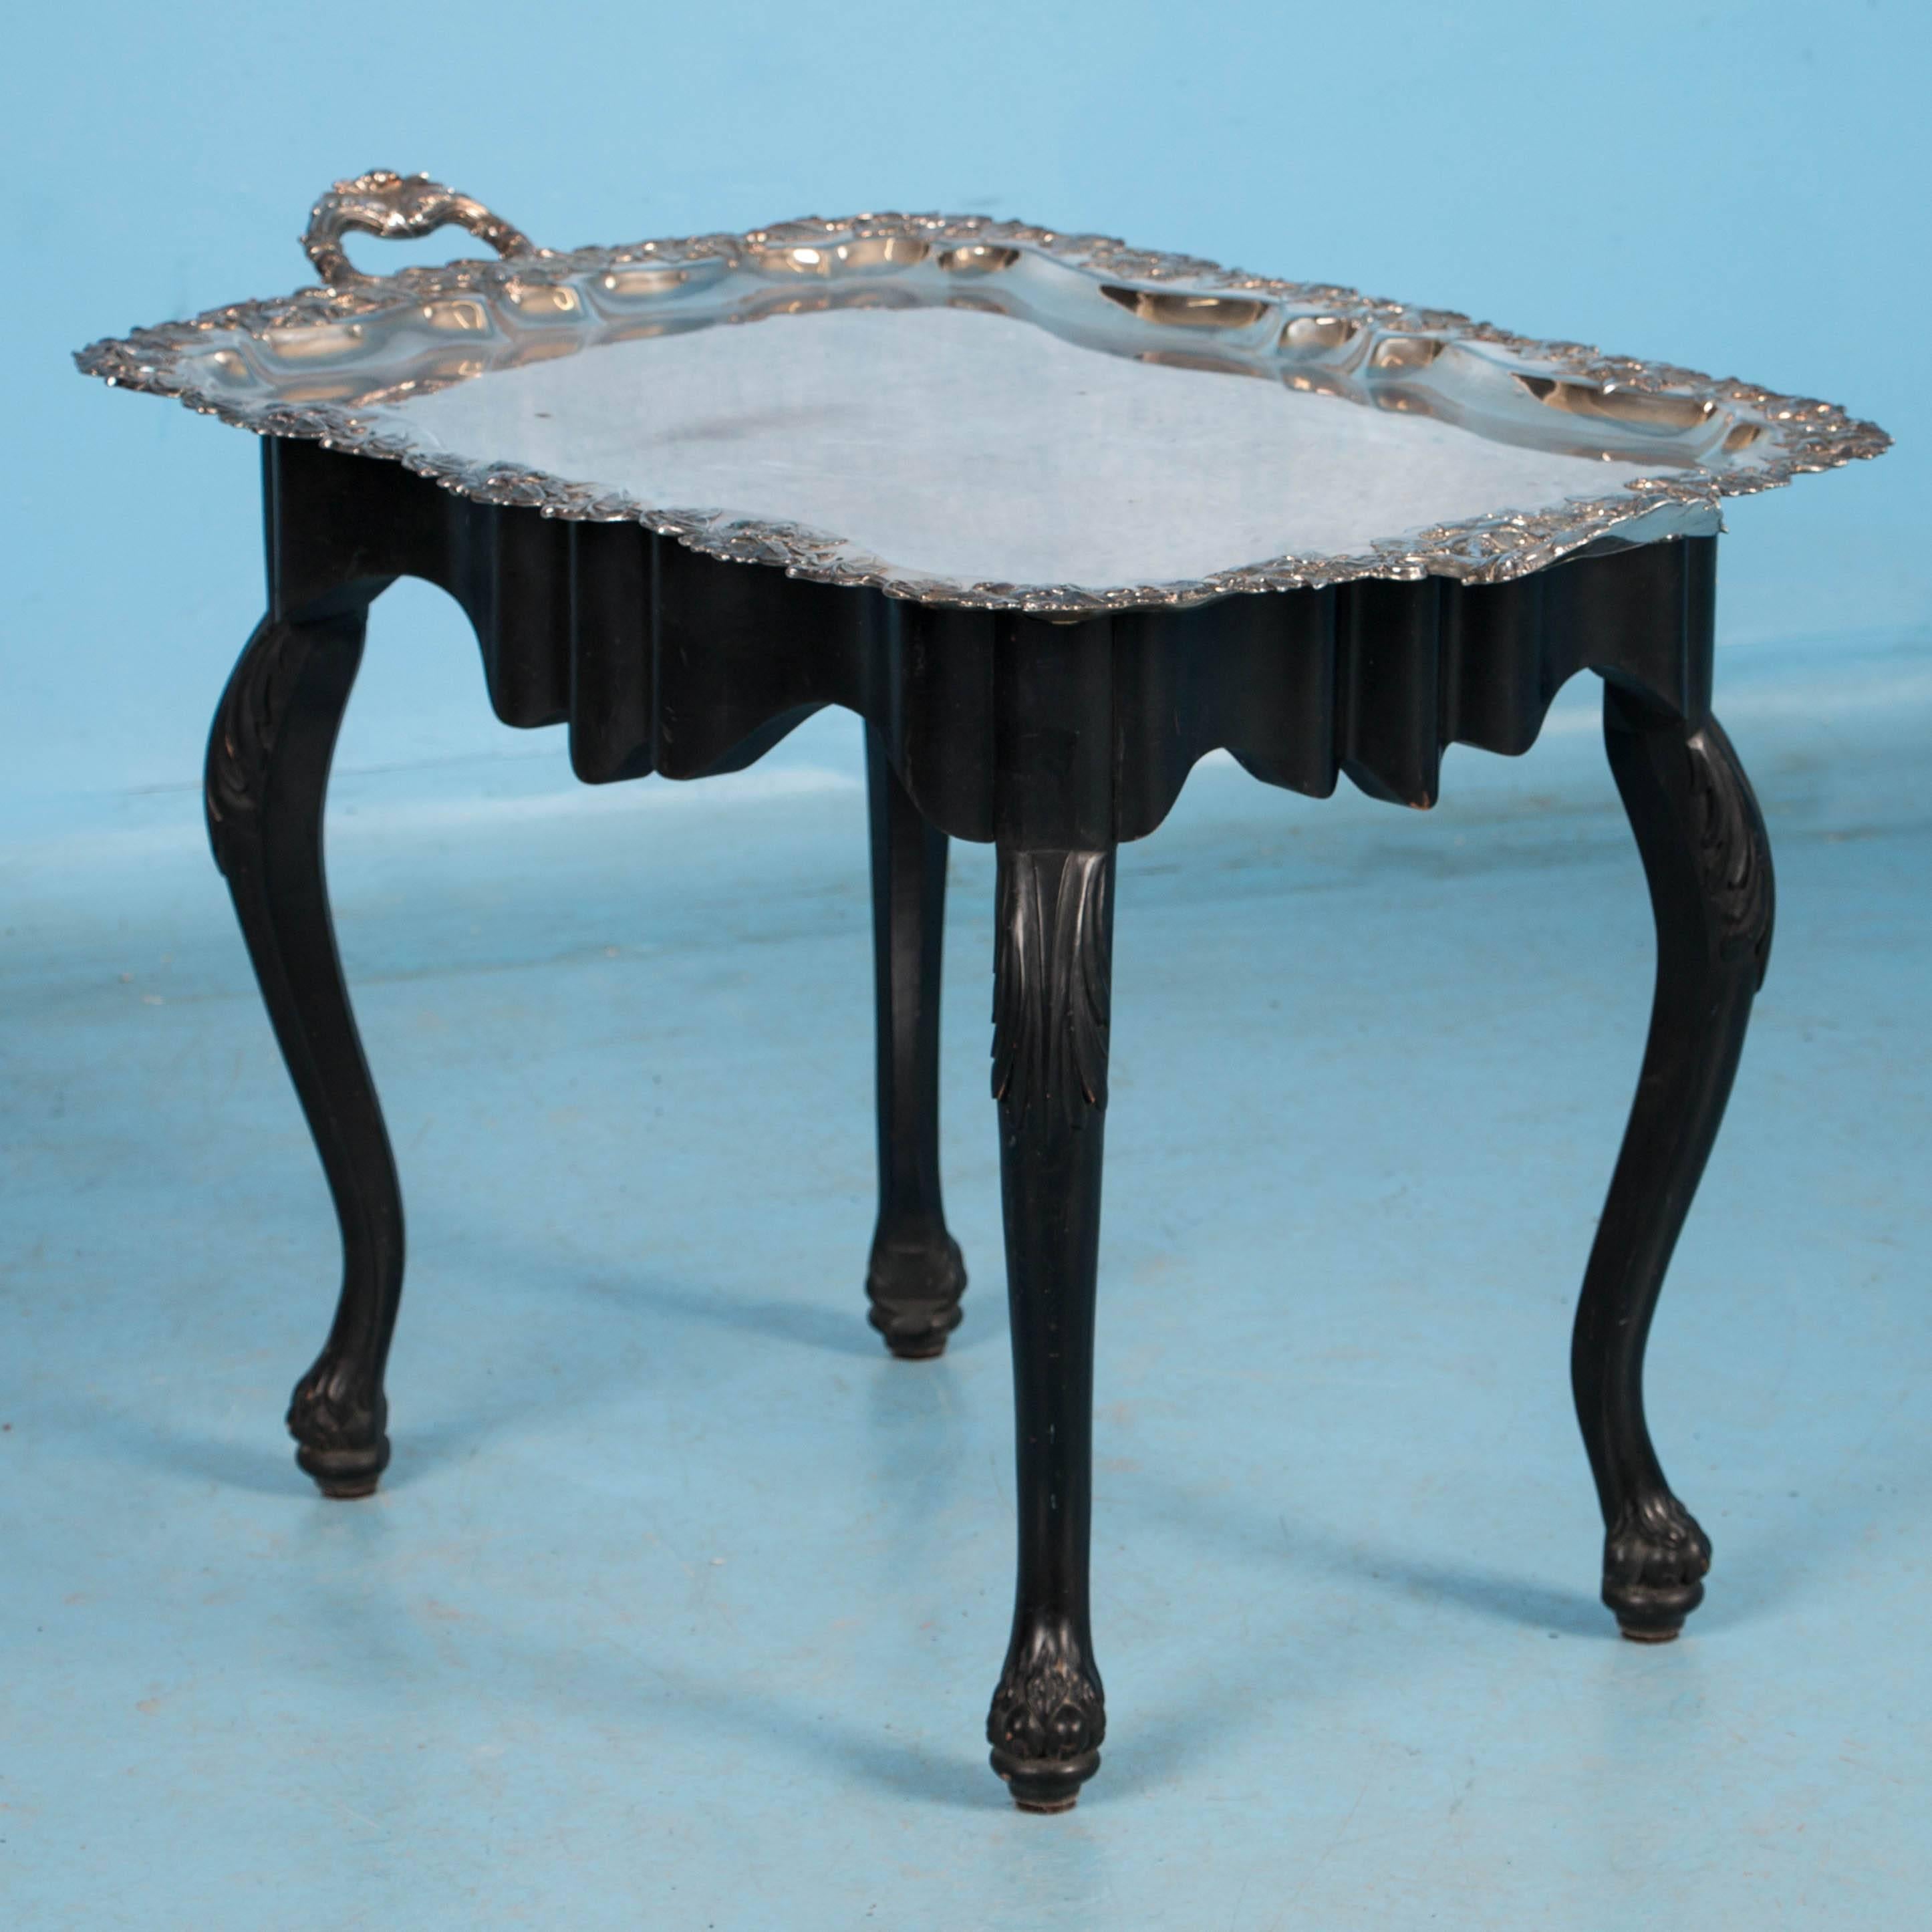 20th Century Antique Silver Plate Tray Table on an Ebonized Base